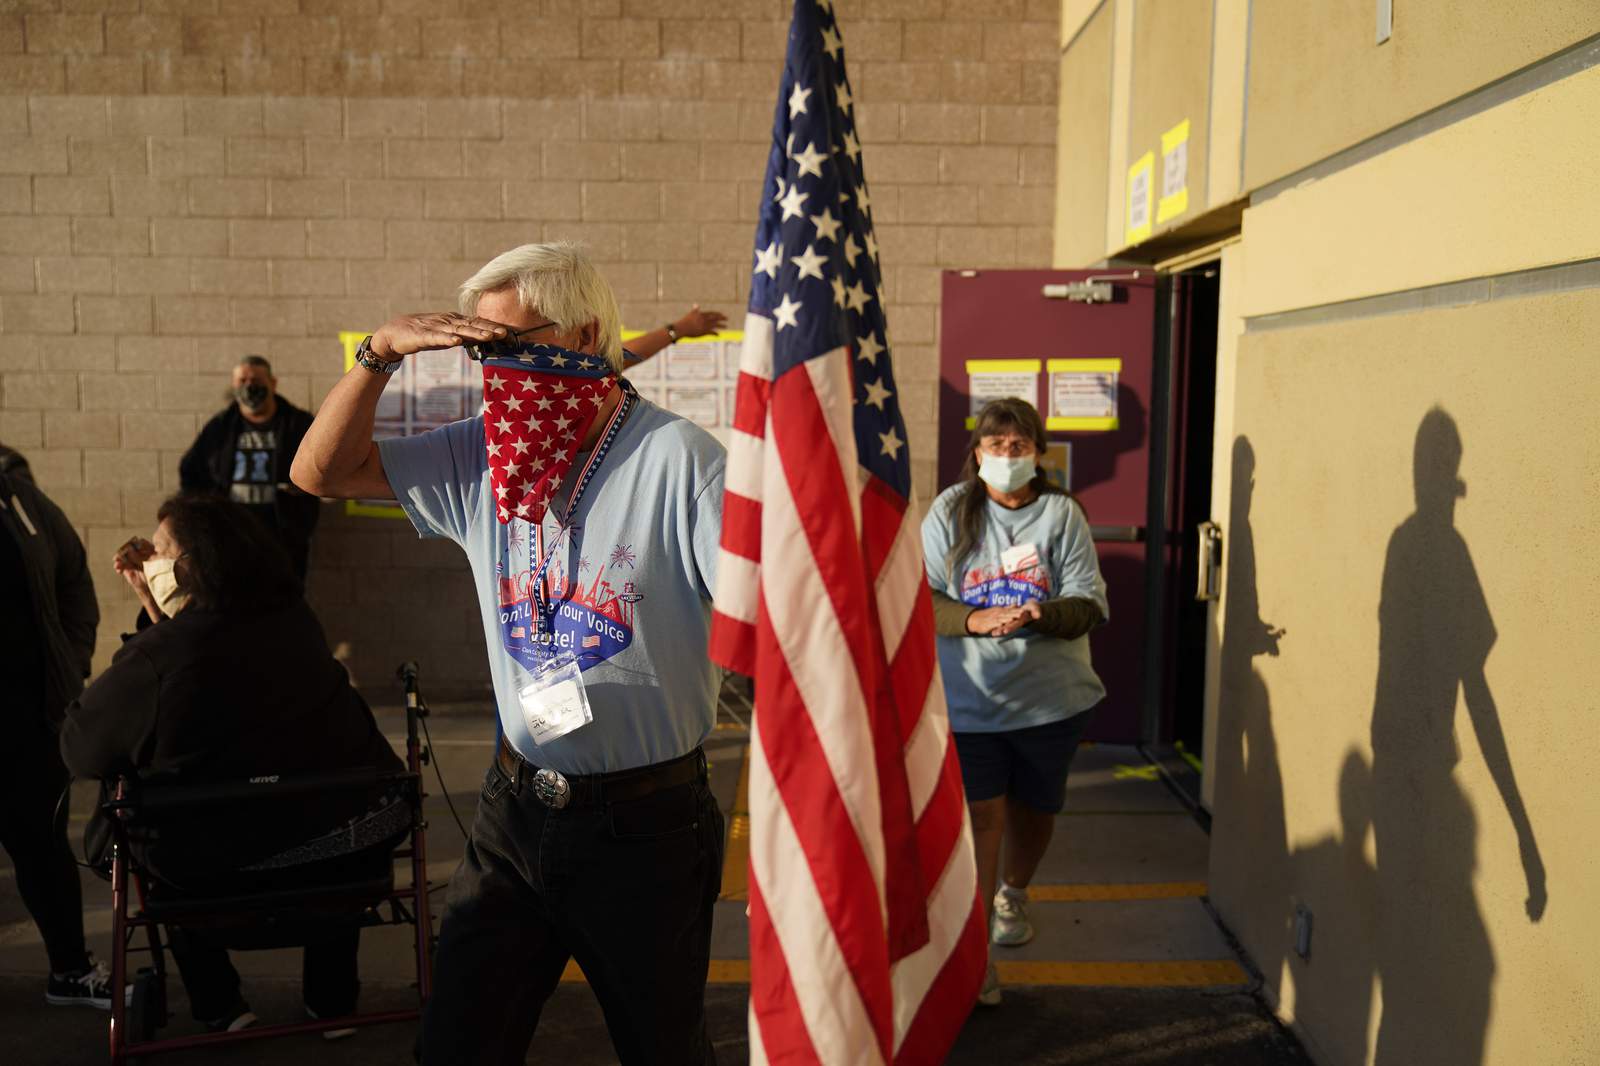 These 9 snap shots give a different view of Election Day across the nation